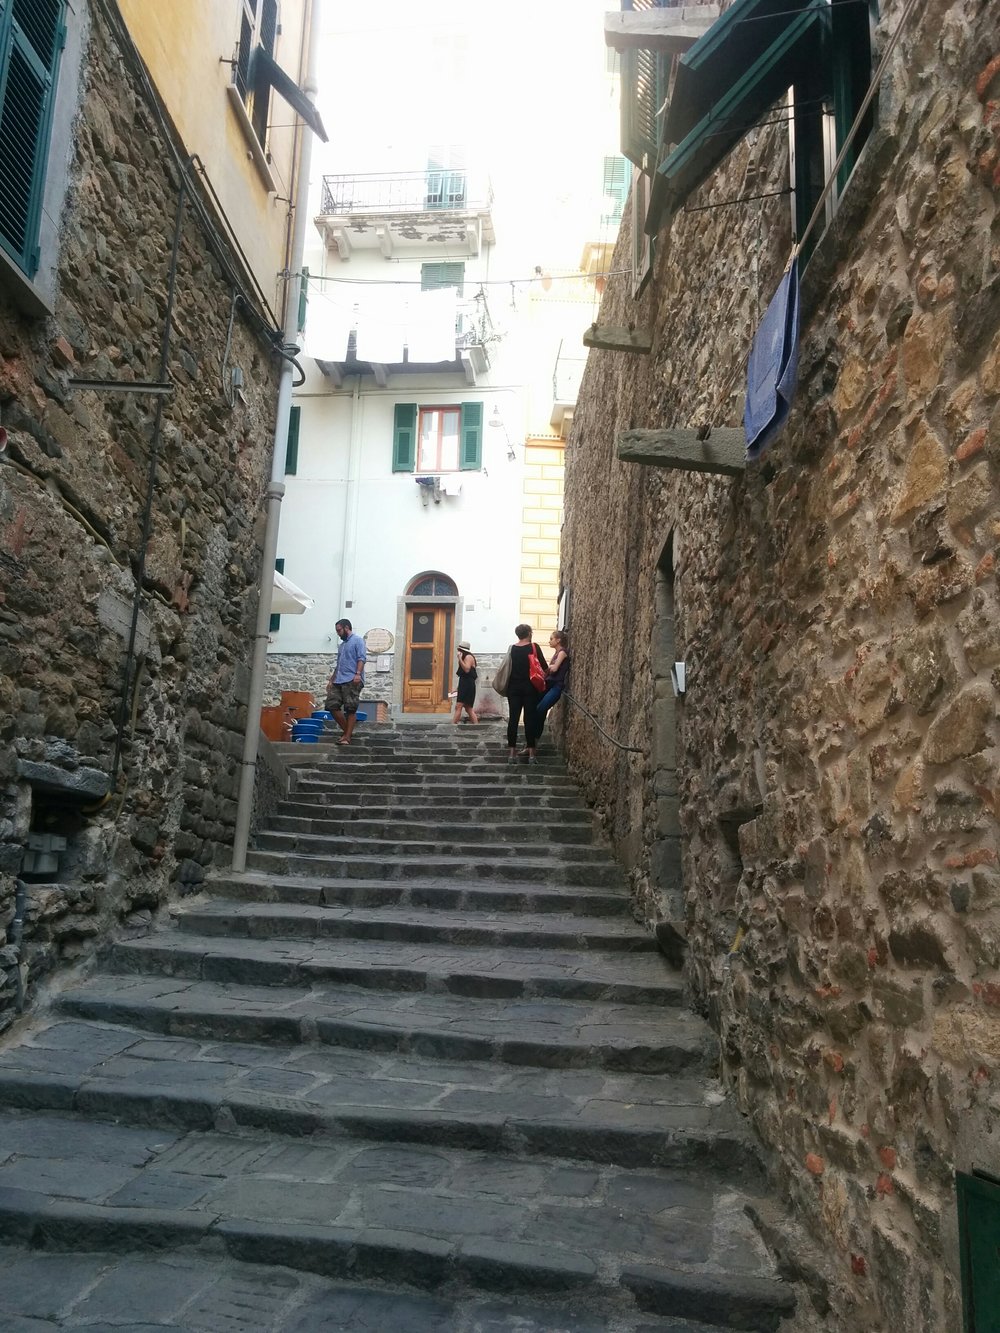  Stairs, stairs, everywhere. These led up to our airbnb. Our room is on the 2nd floor with green shutters and our clean (sink-washed) laundry drying in the wind. 